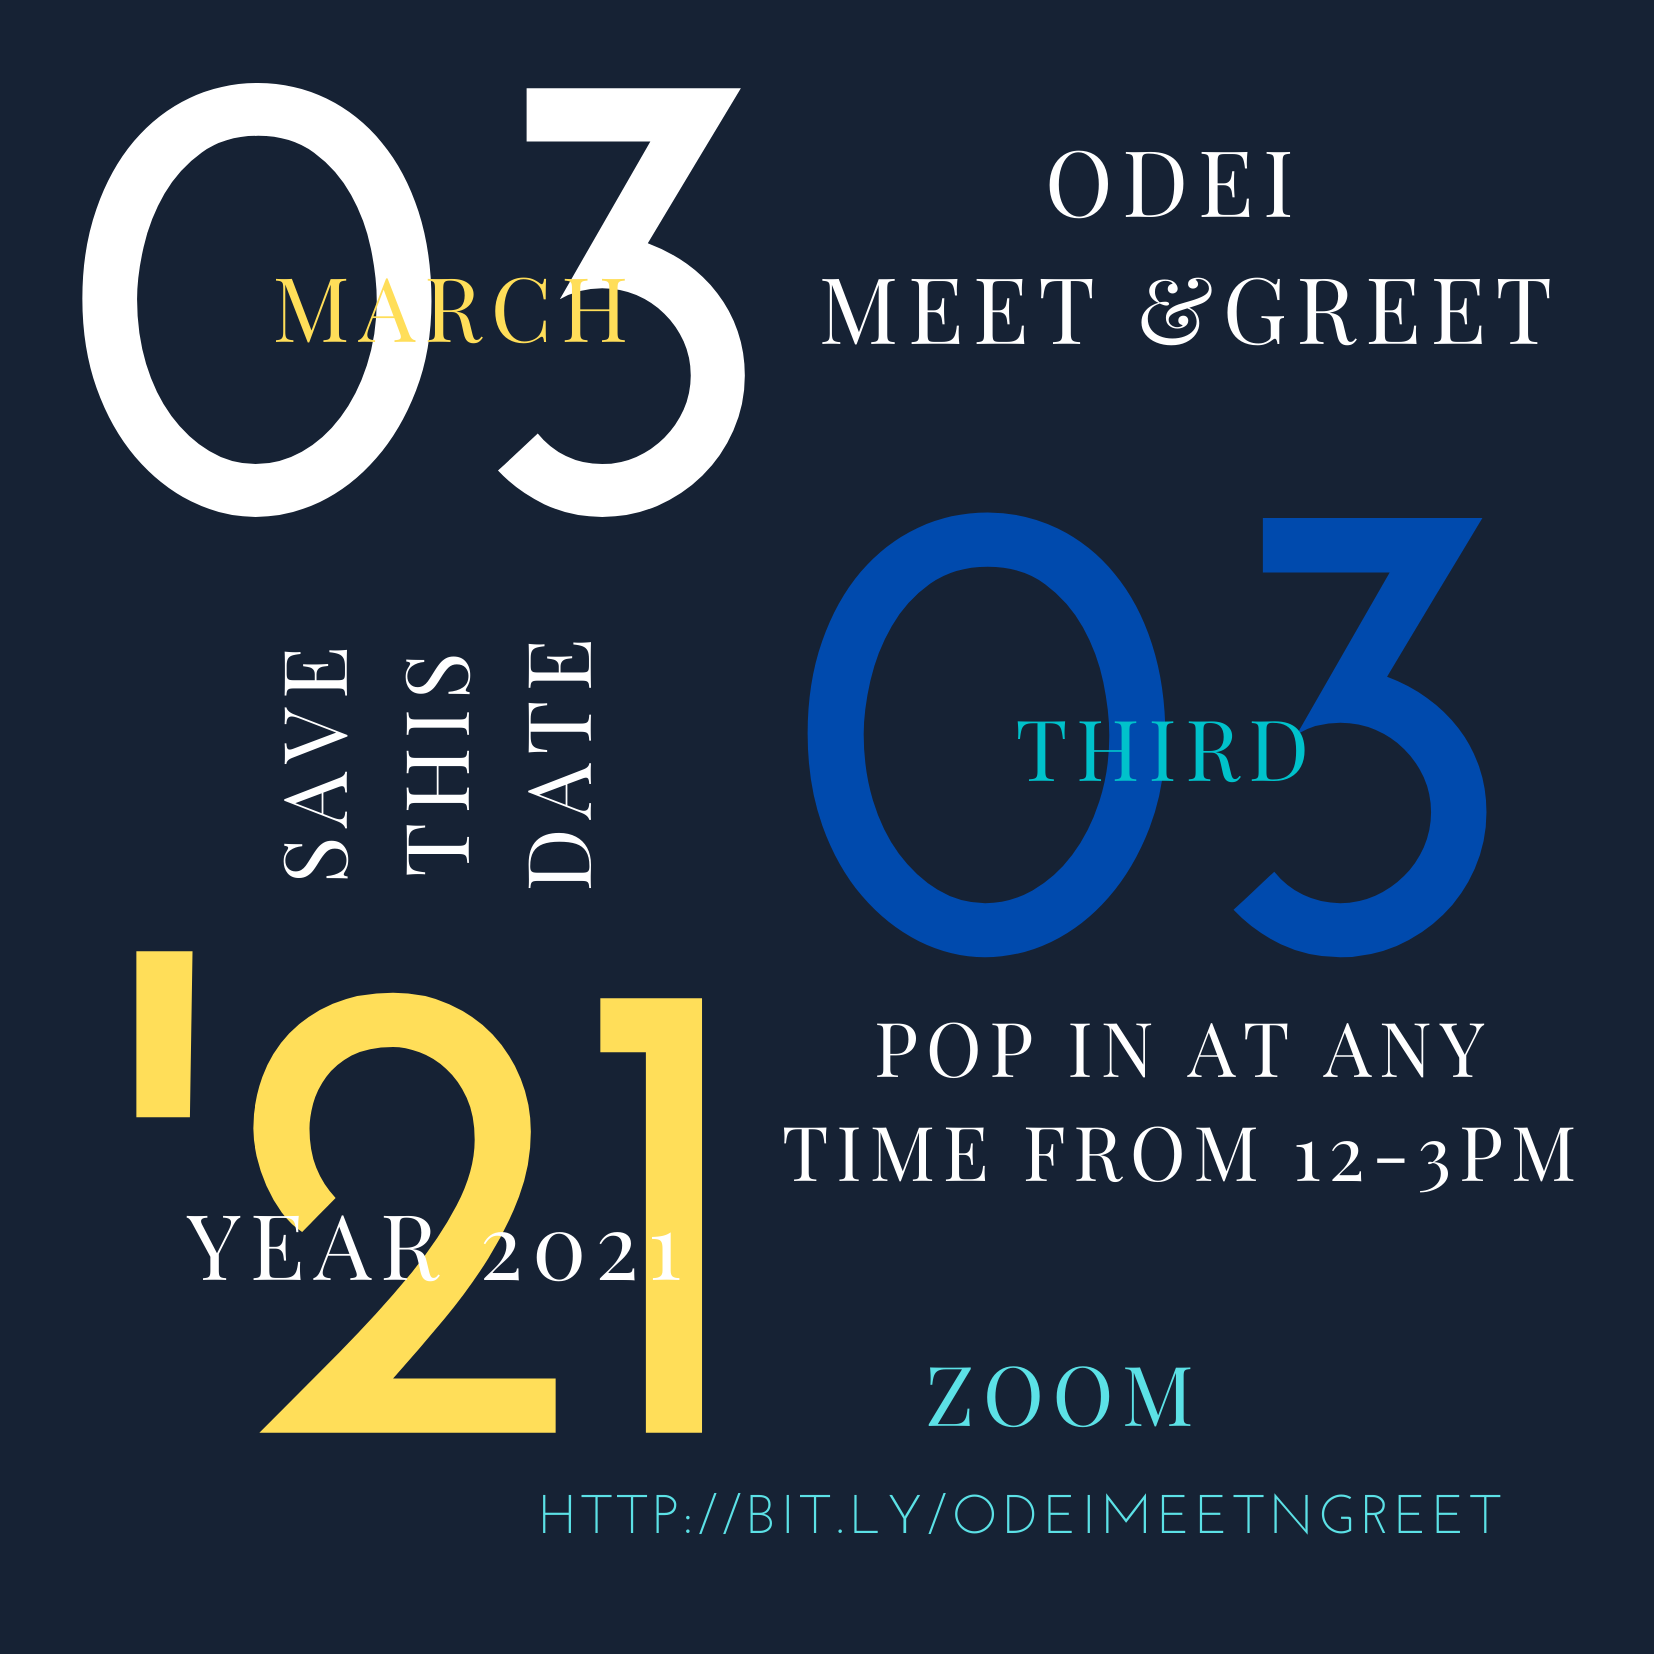 Flyer for ODEI Meet and Greet